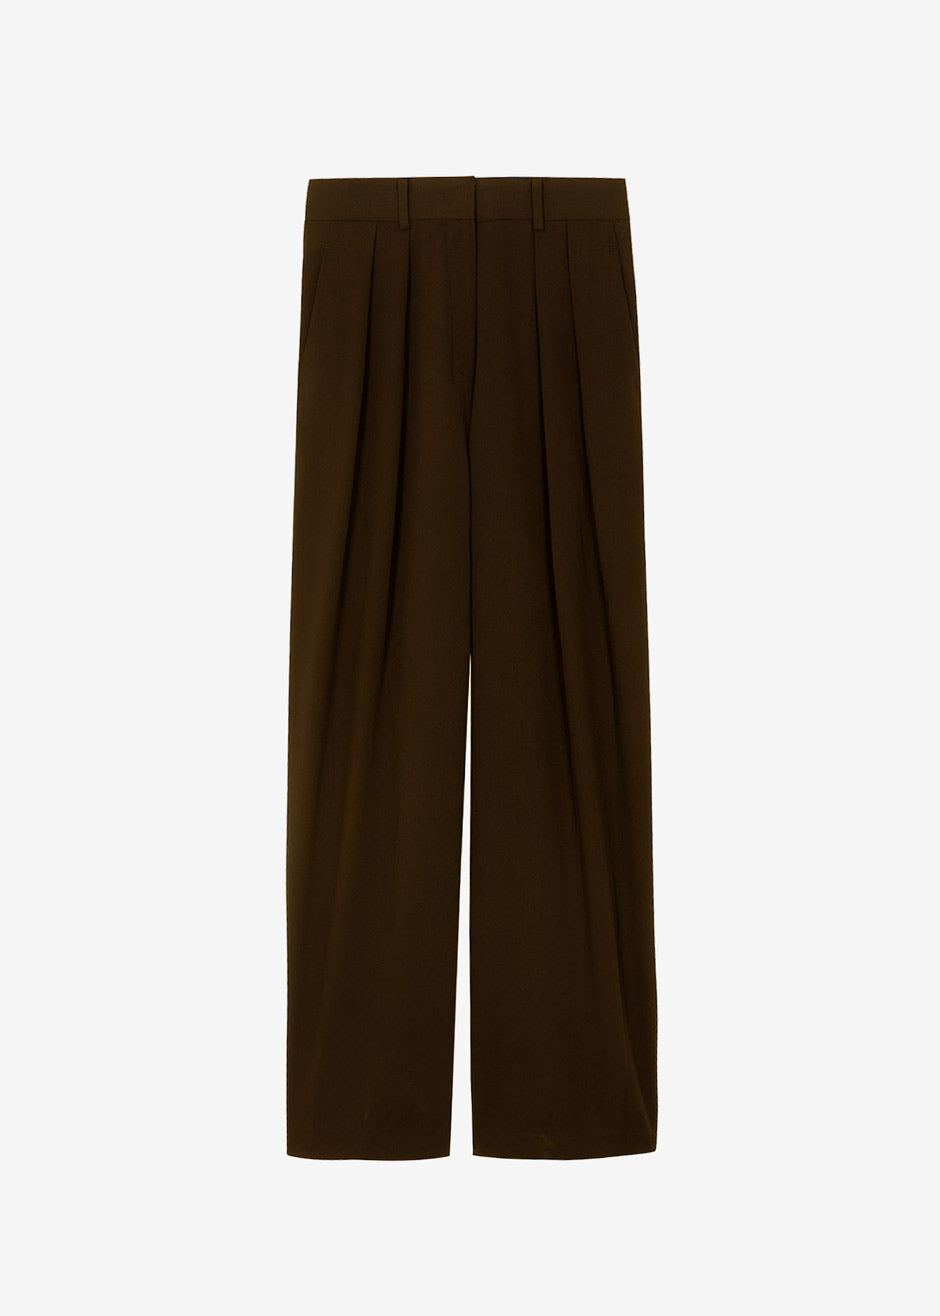 Tansy Pleated Trousers - Chocolate - 14